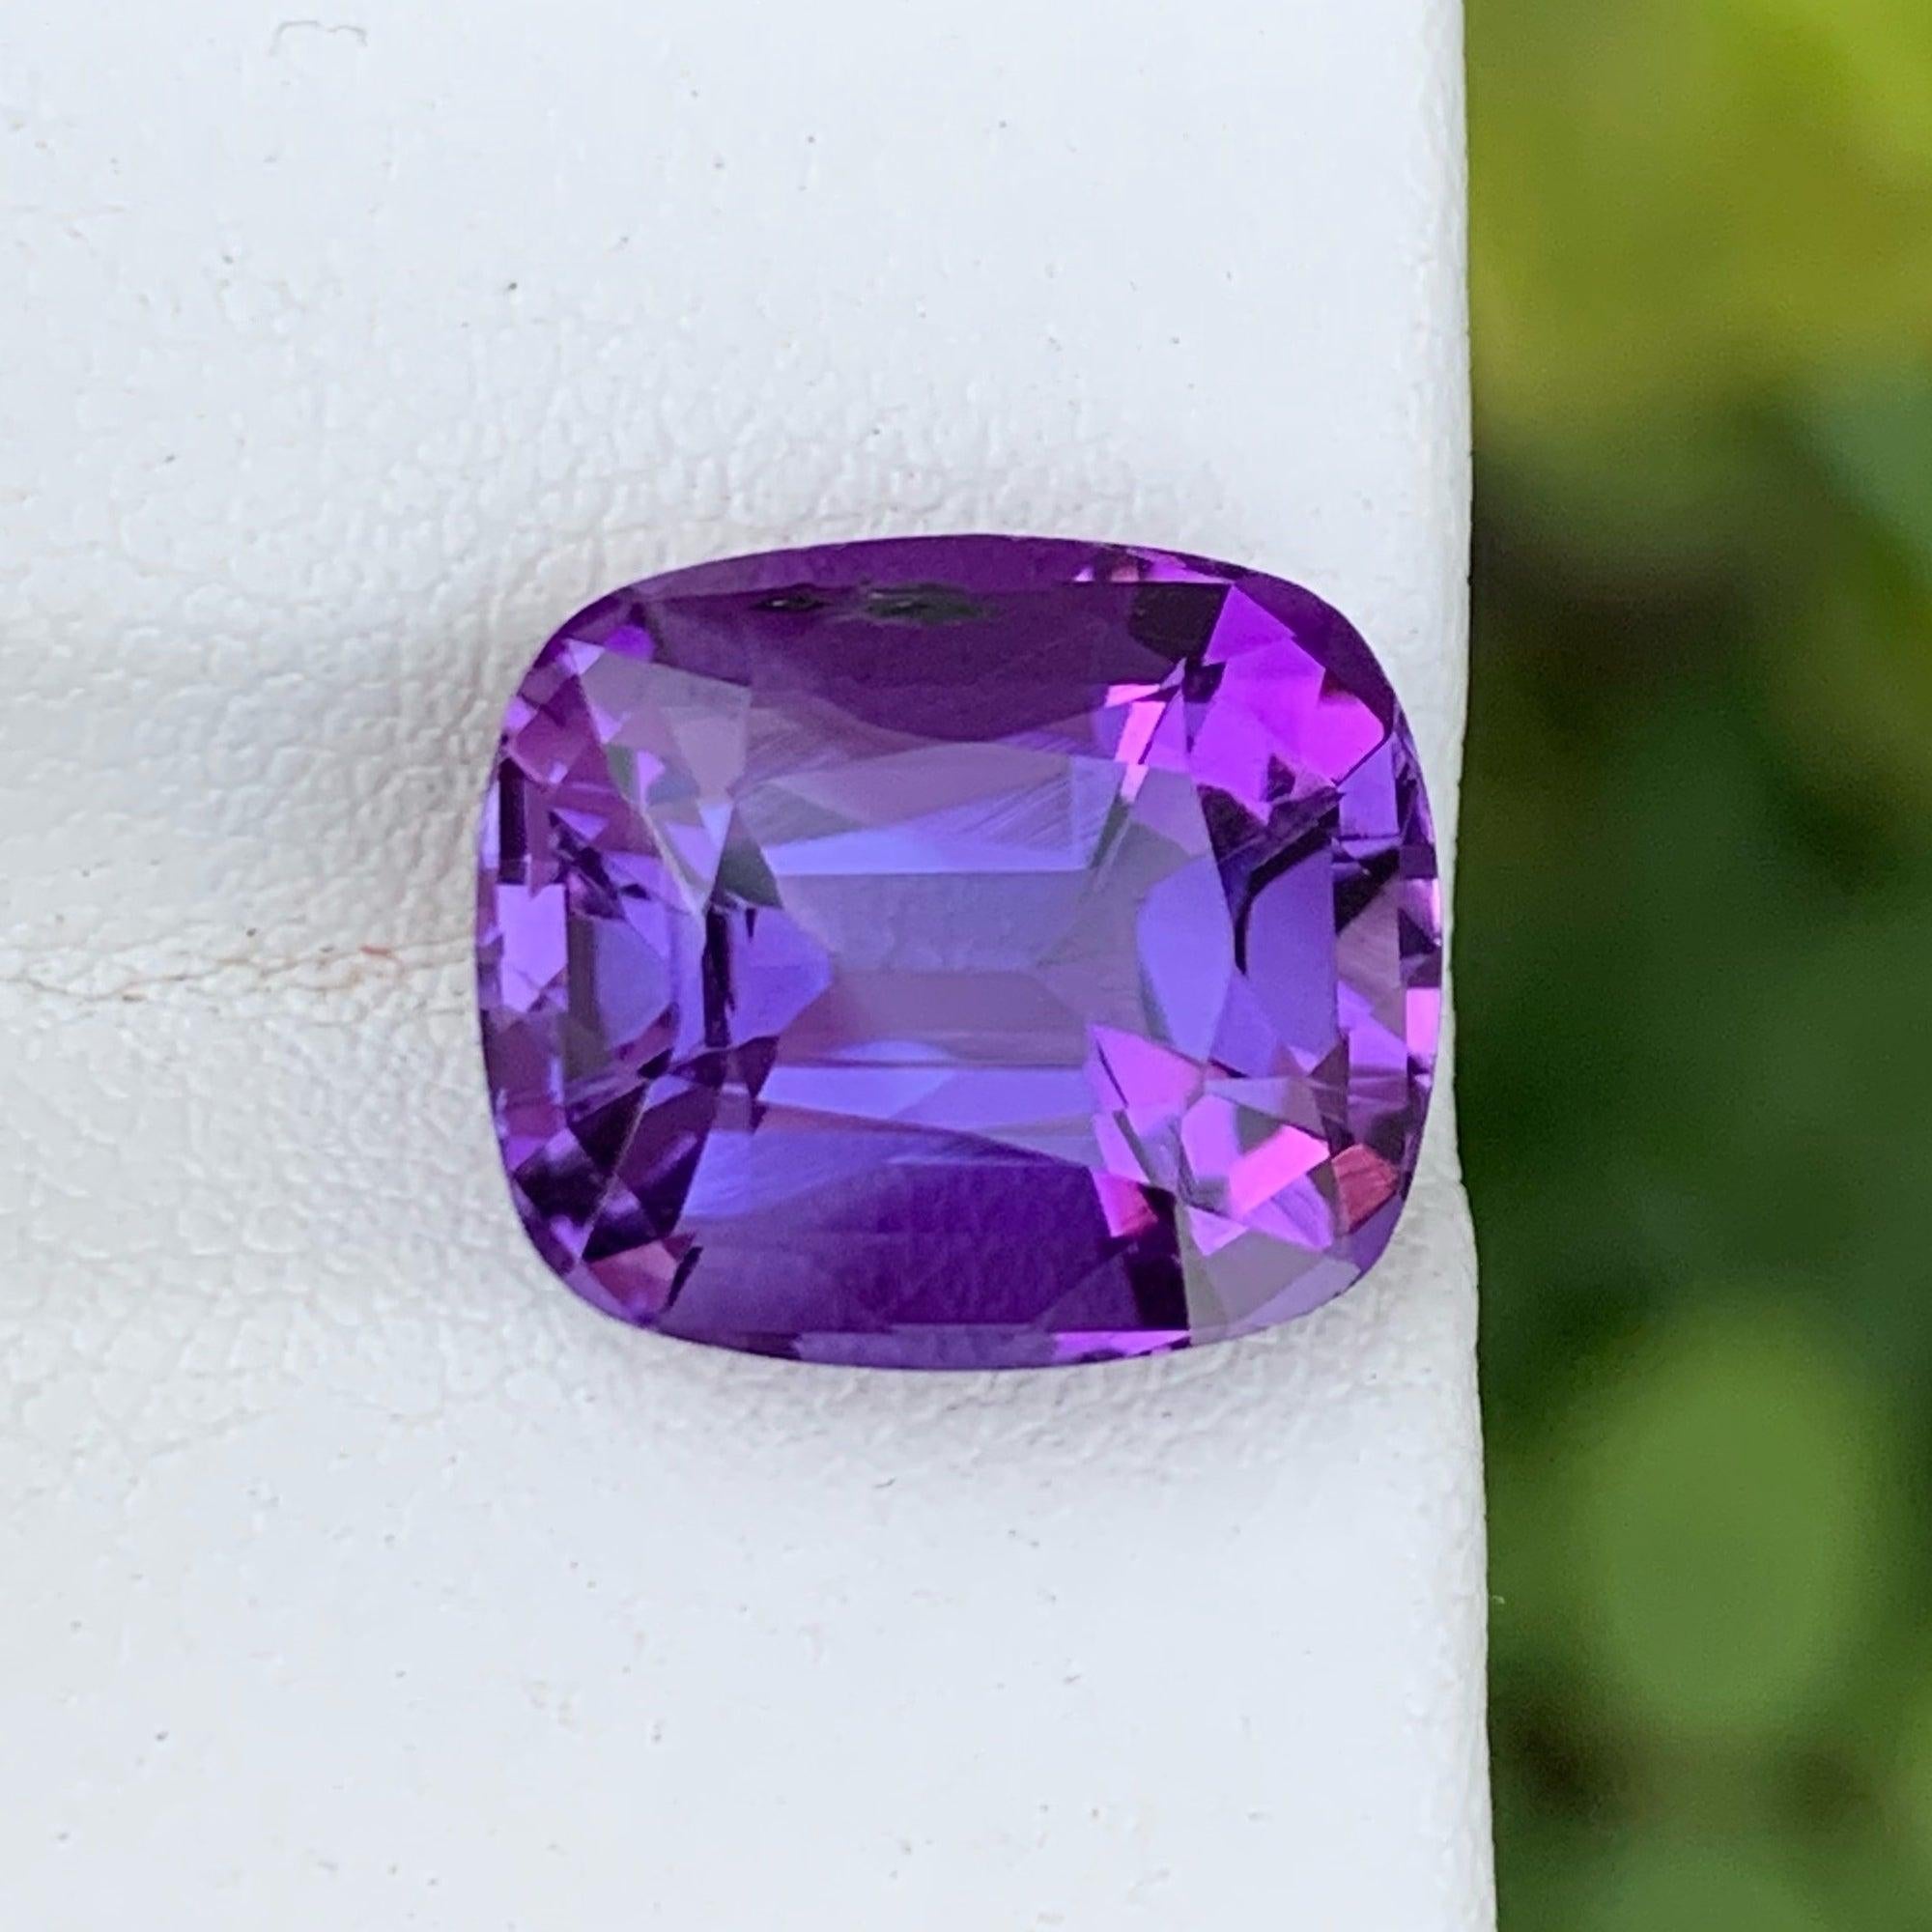 Modern Exceptional Royal Purple Amethyst Stone 6.80 Carats Loose Gems Ring Jewelry For Sale